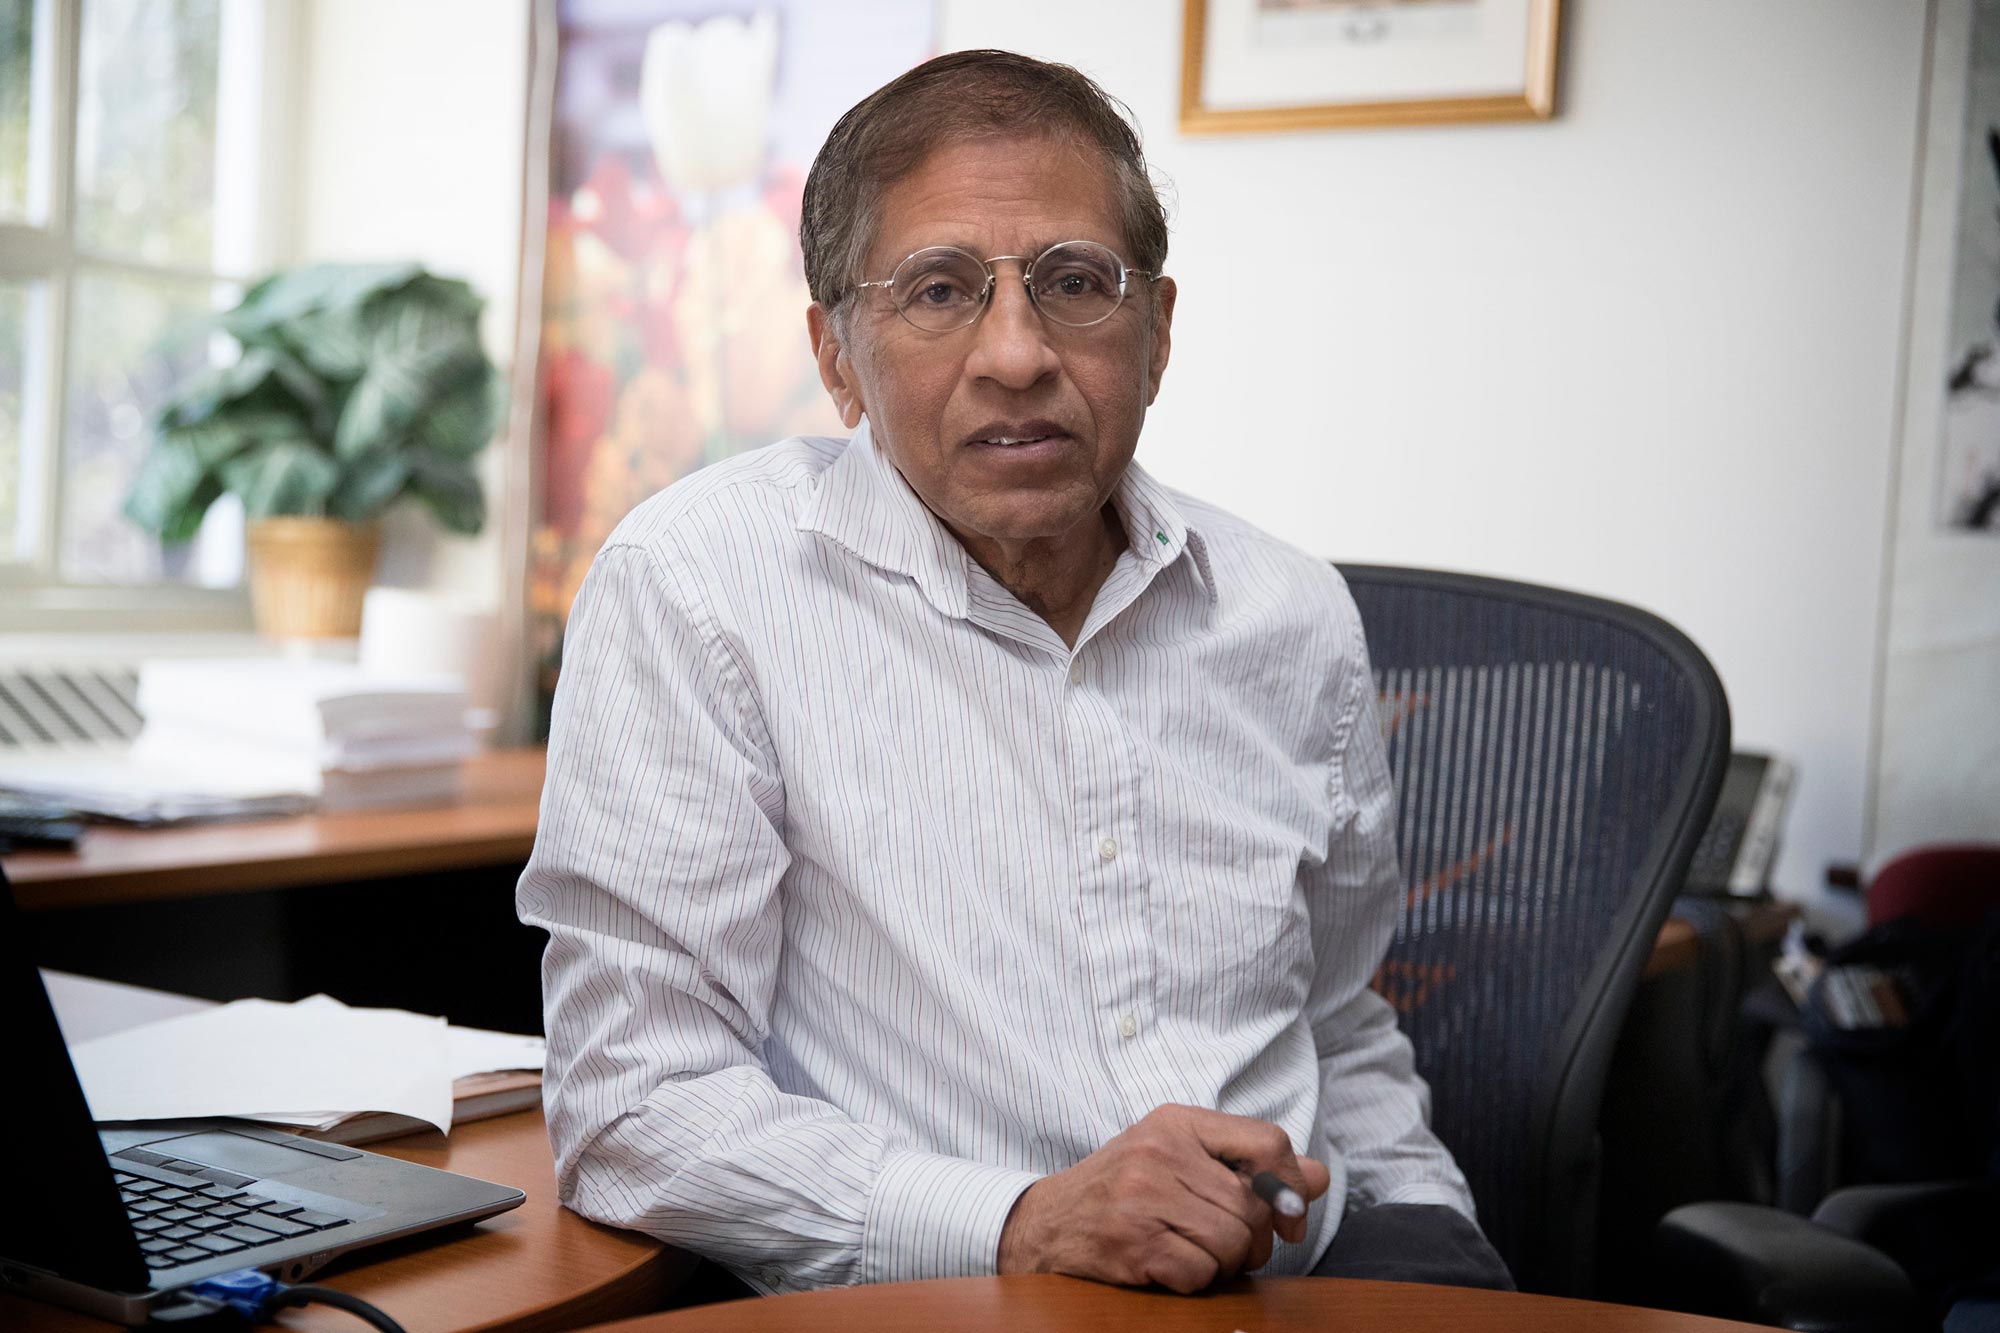 Mool C. Gupta is the Langley Distinguished Professor of Electrical and Computer Engineering. (Photo by Dan Addison, University Communications)